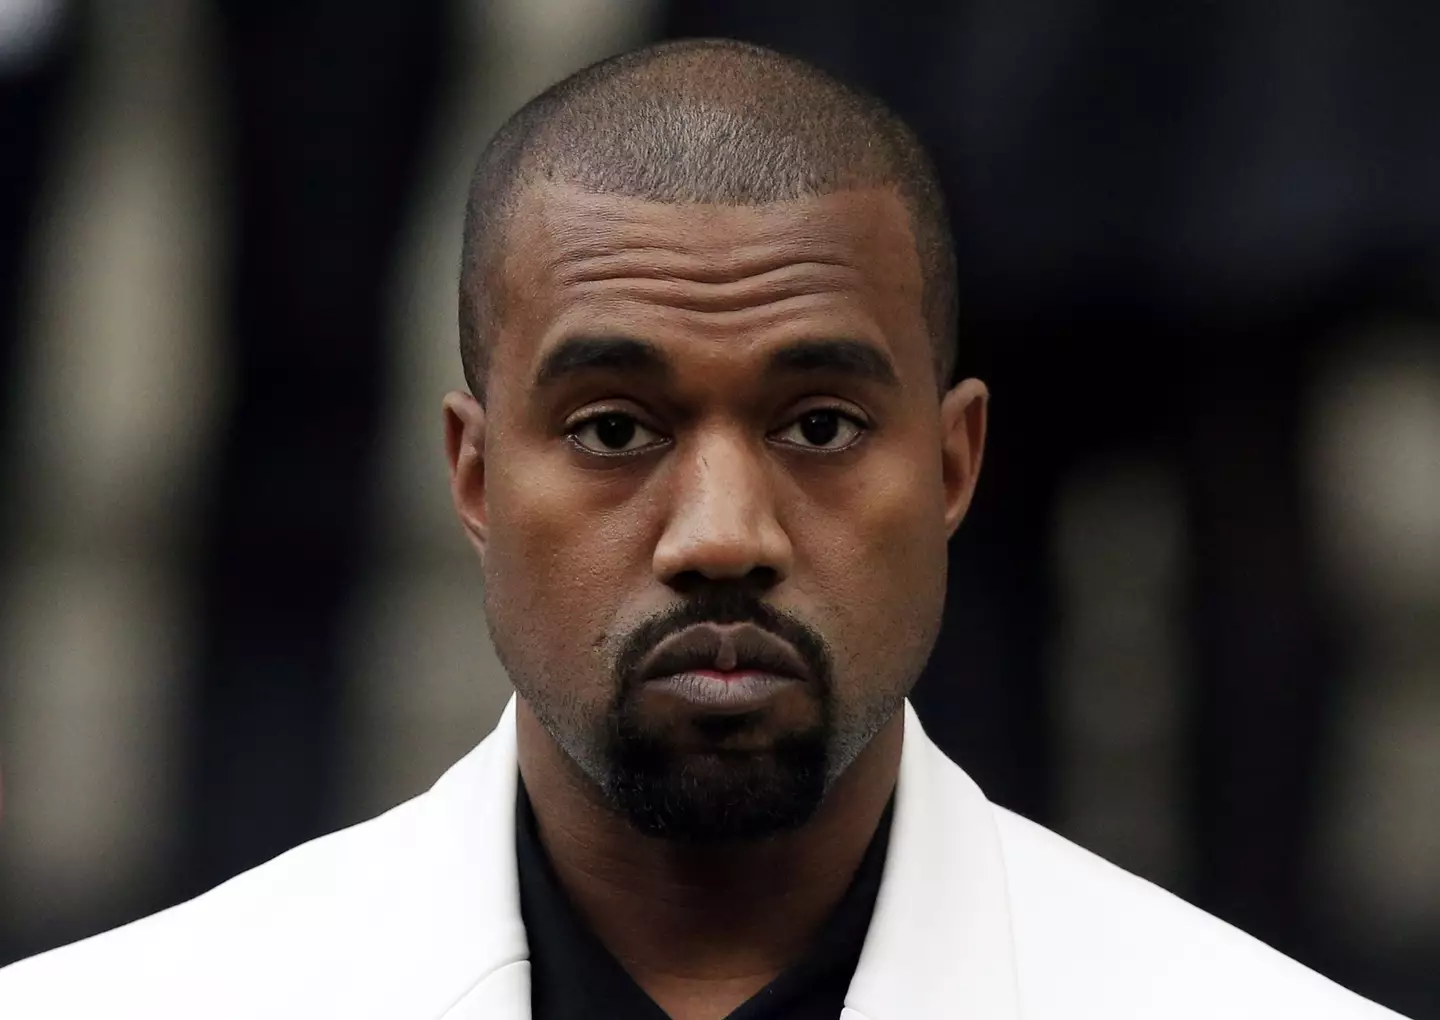 Kanye West released a new song on Friday in which he called himself 'the table' (